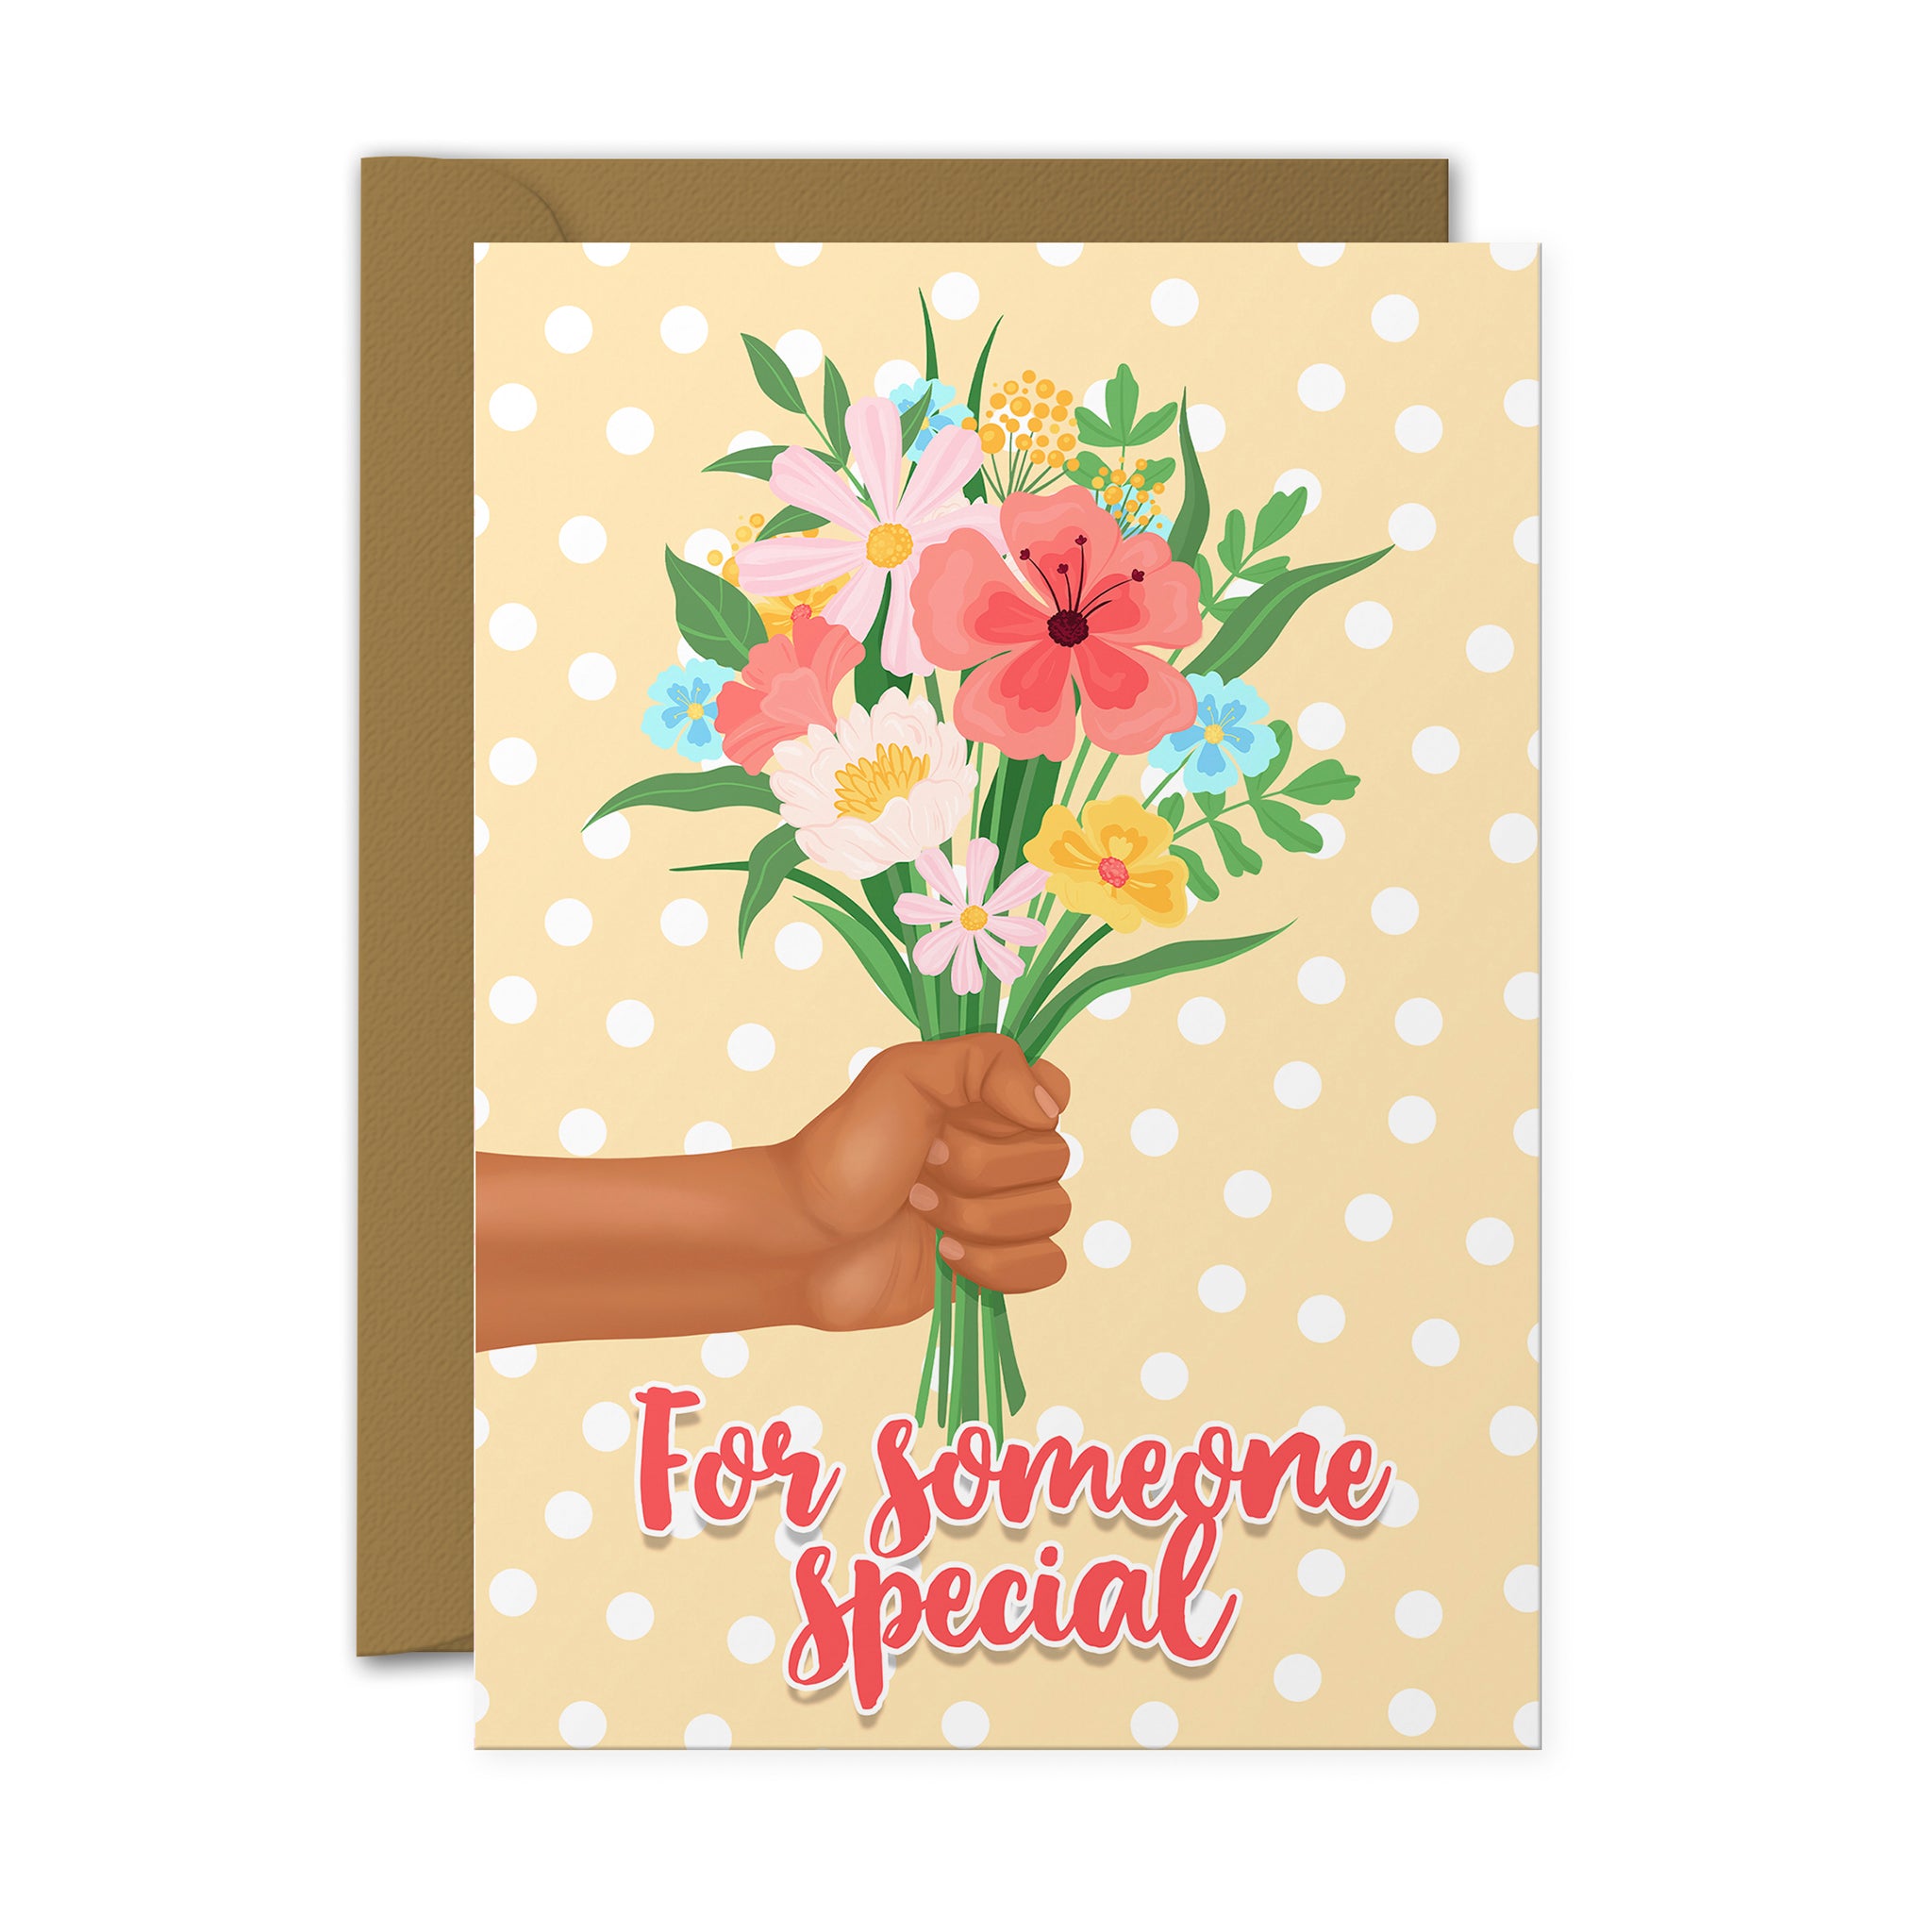 For Someone Special Card - Flowers Card - Diverse Card